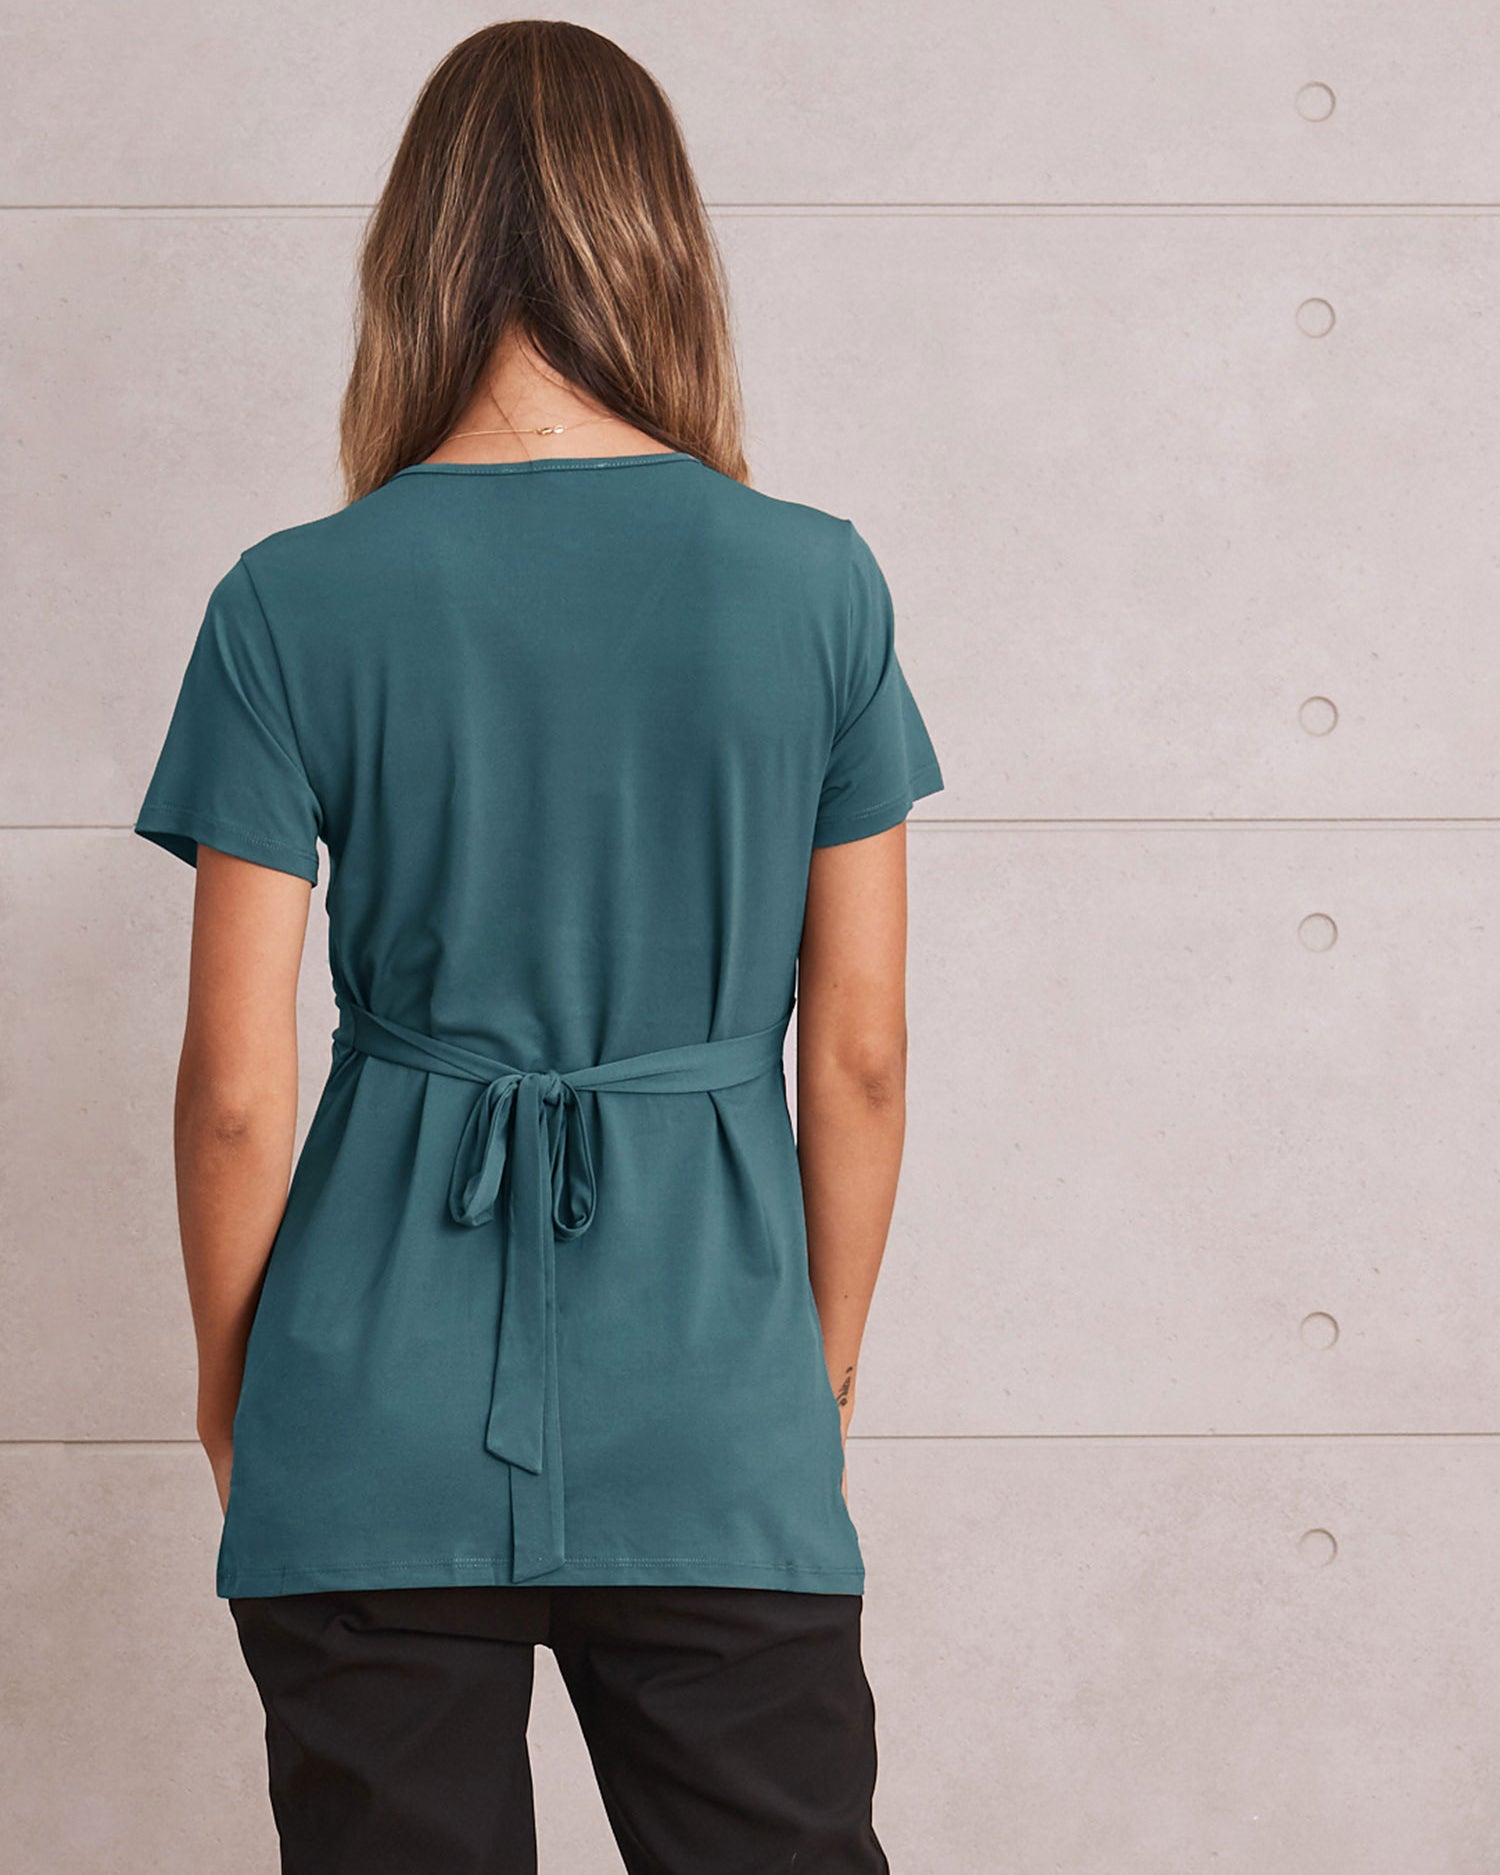 Back View - Bree Maternity  Crossover Work Top -in Teal